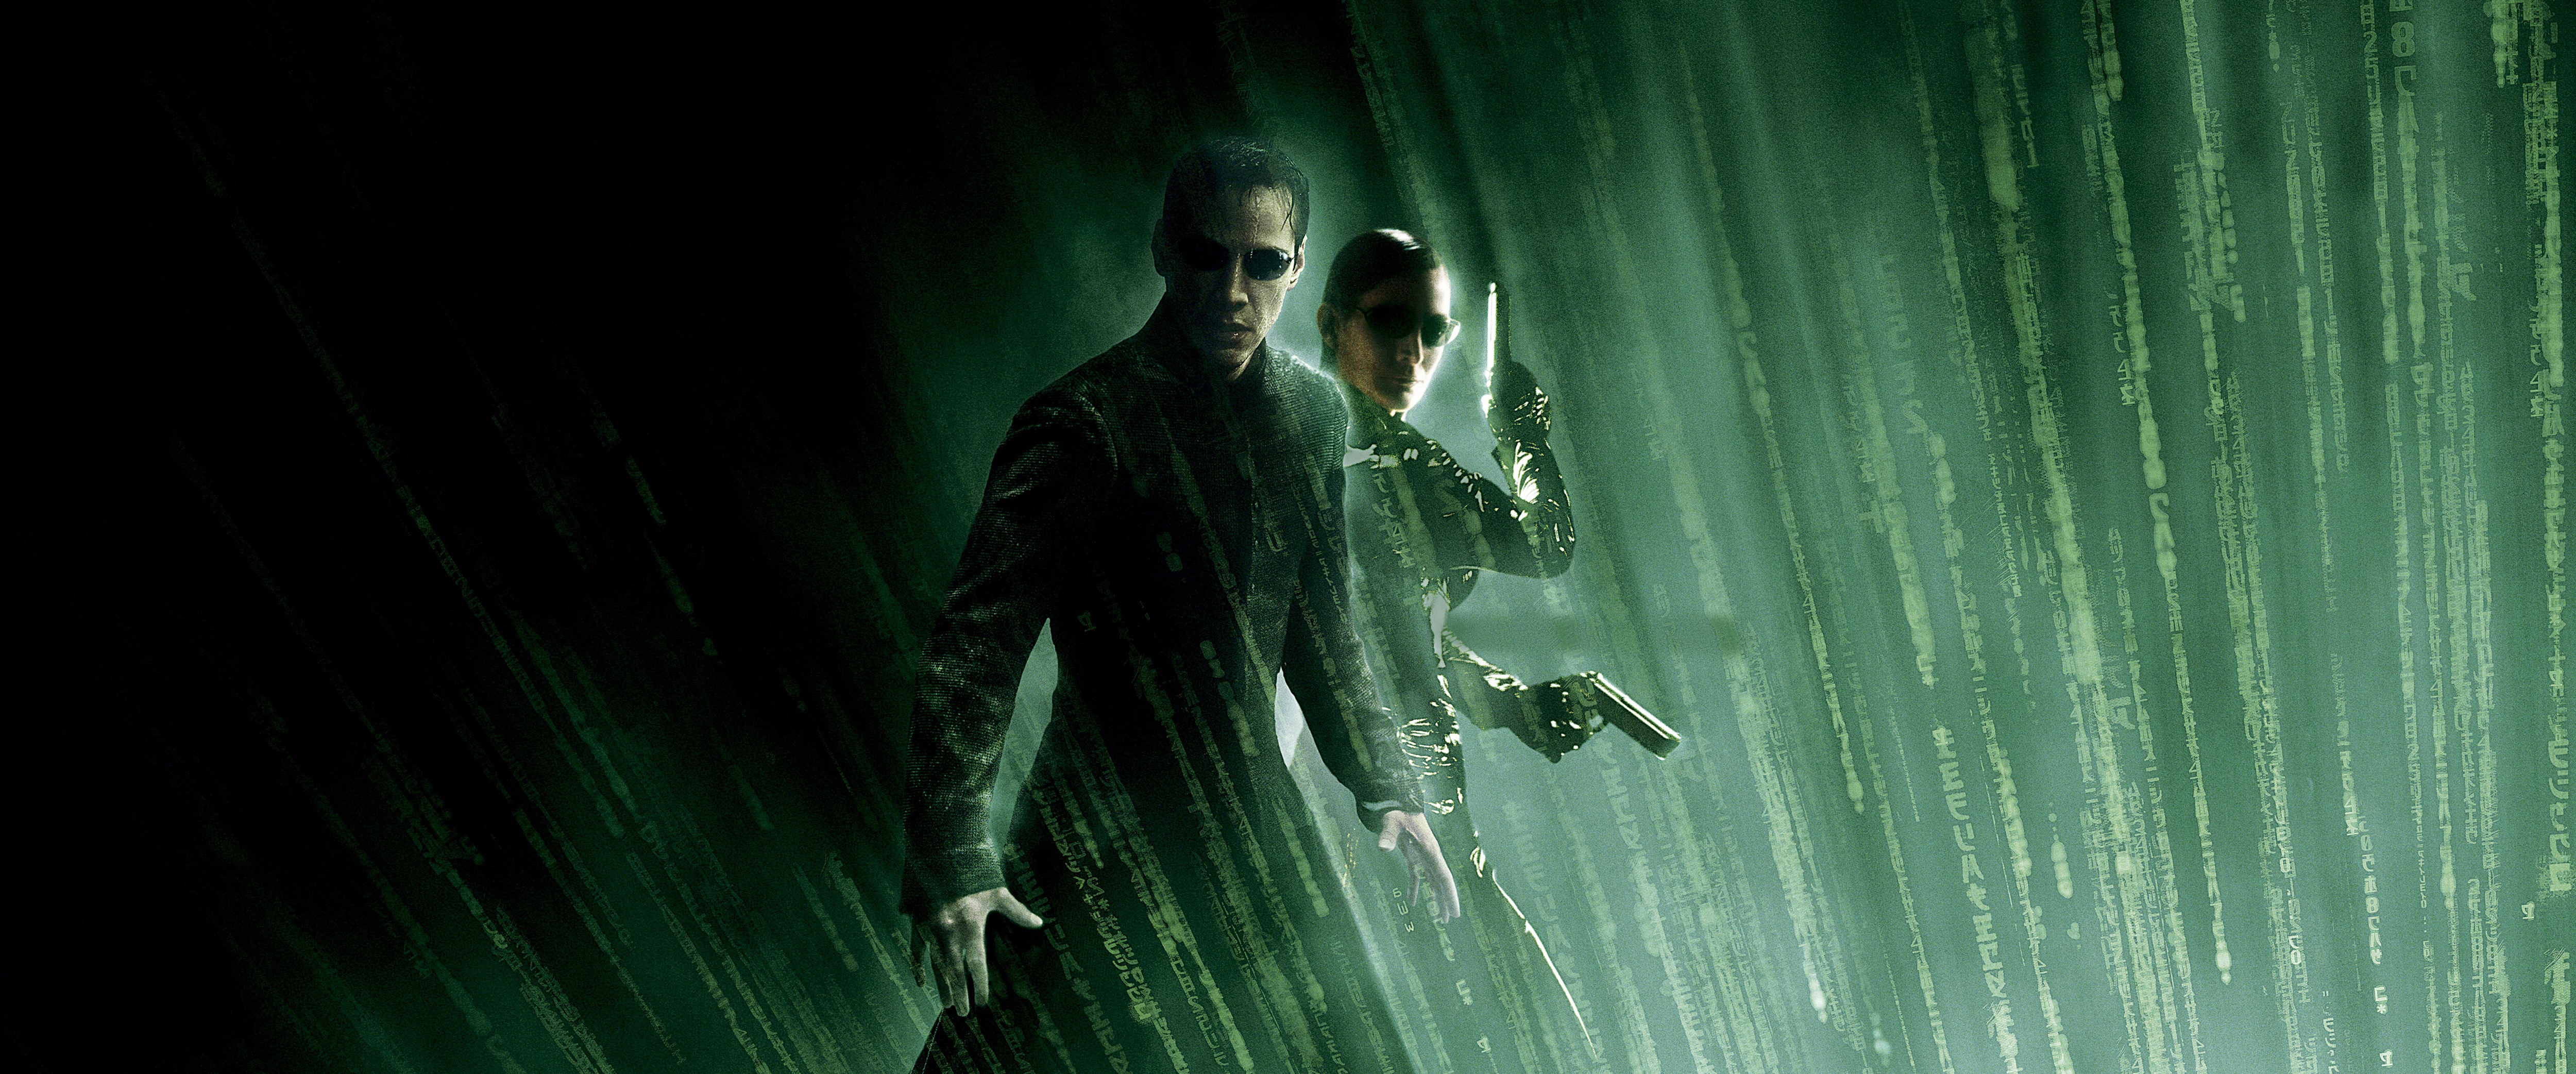 20 The Matrix Reloaded HD Wallpapers and Backgrounds 5000x2084